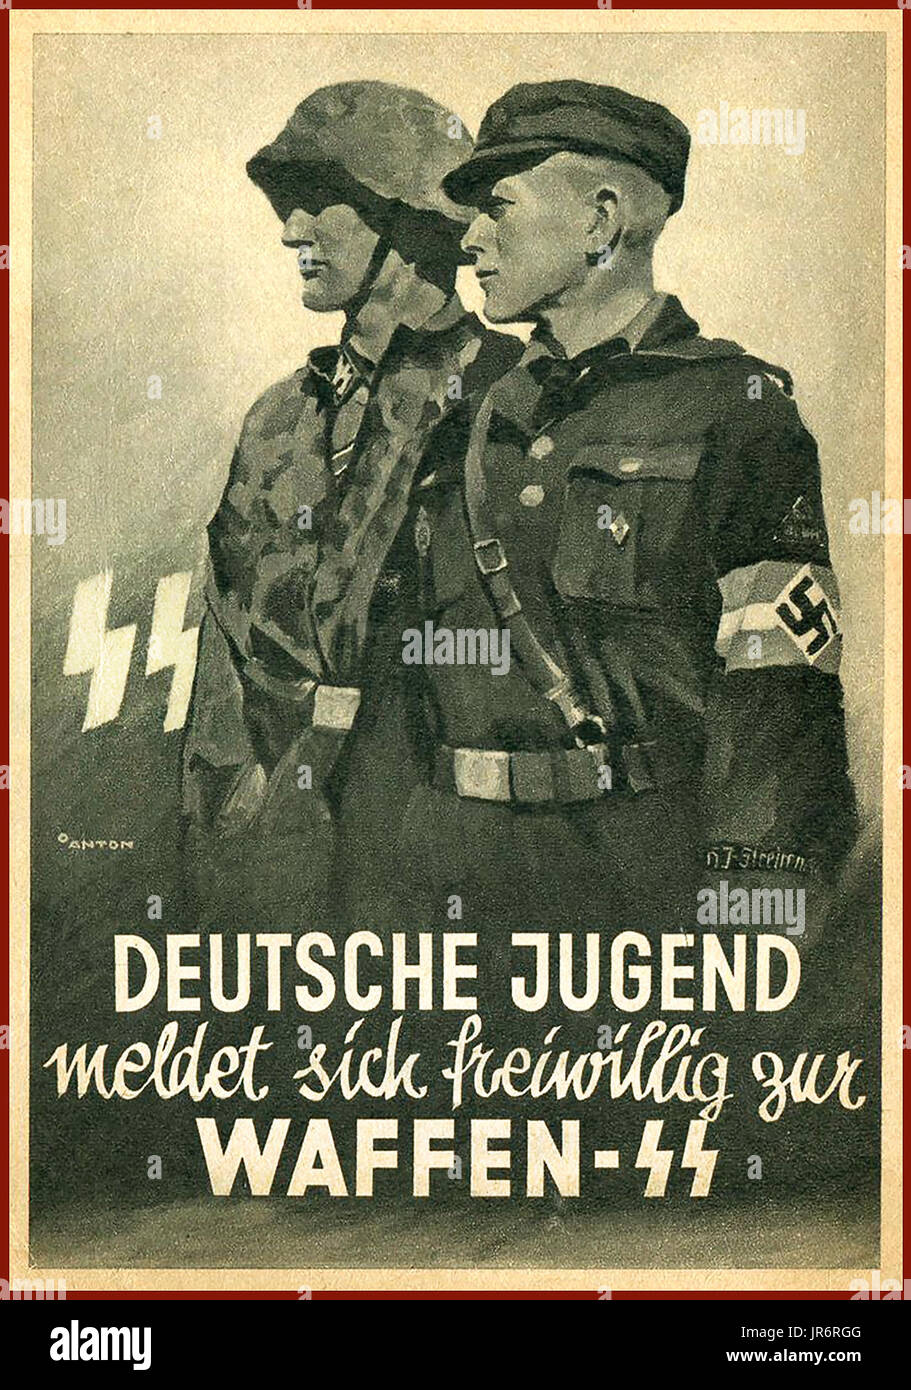 WAFFEN SS Recruitment Vintage WW2 1940's German Propaganda poster speaking to German/Hitler Youth to report and join freely to The Waffen SS Stock Photo